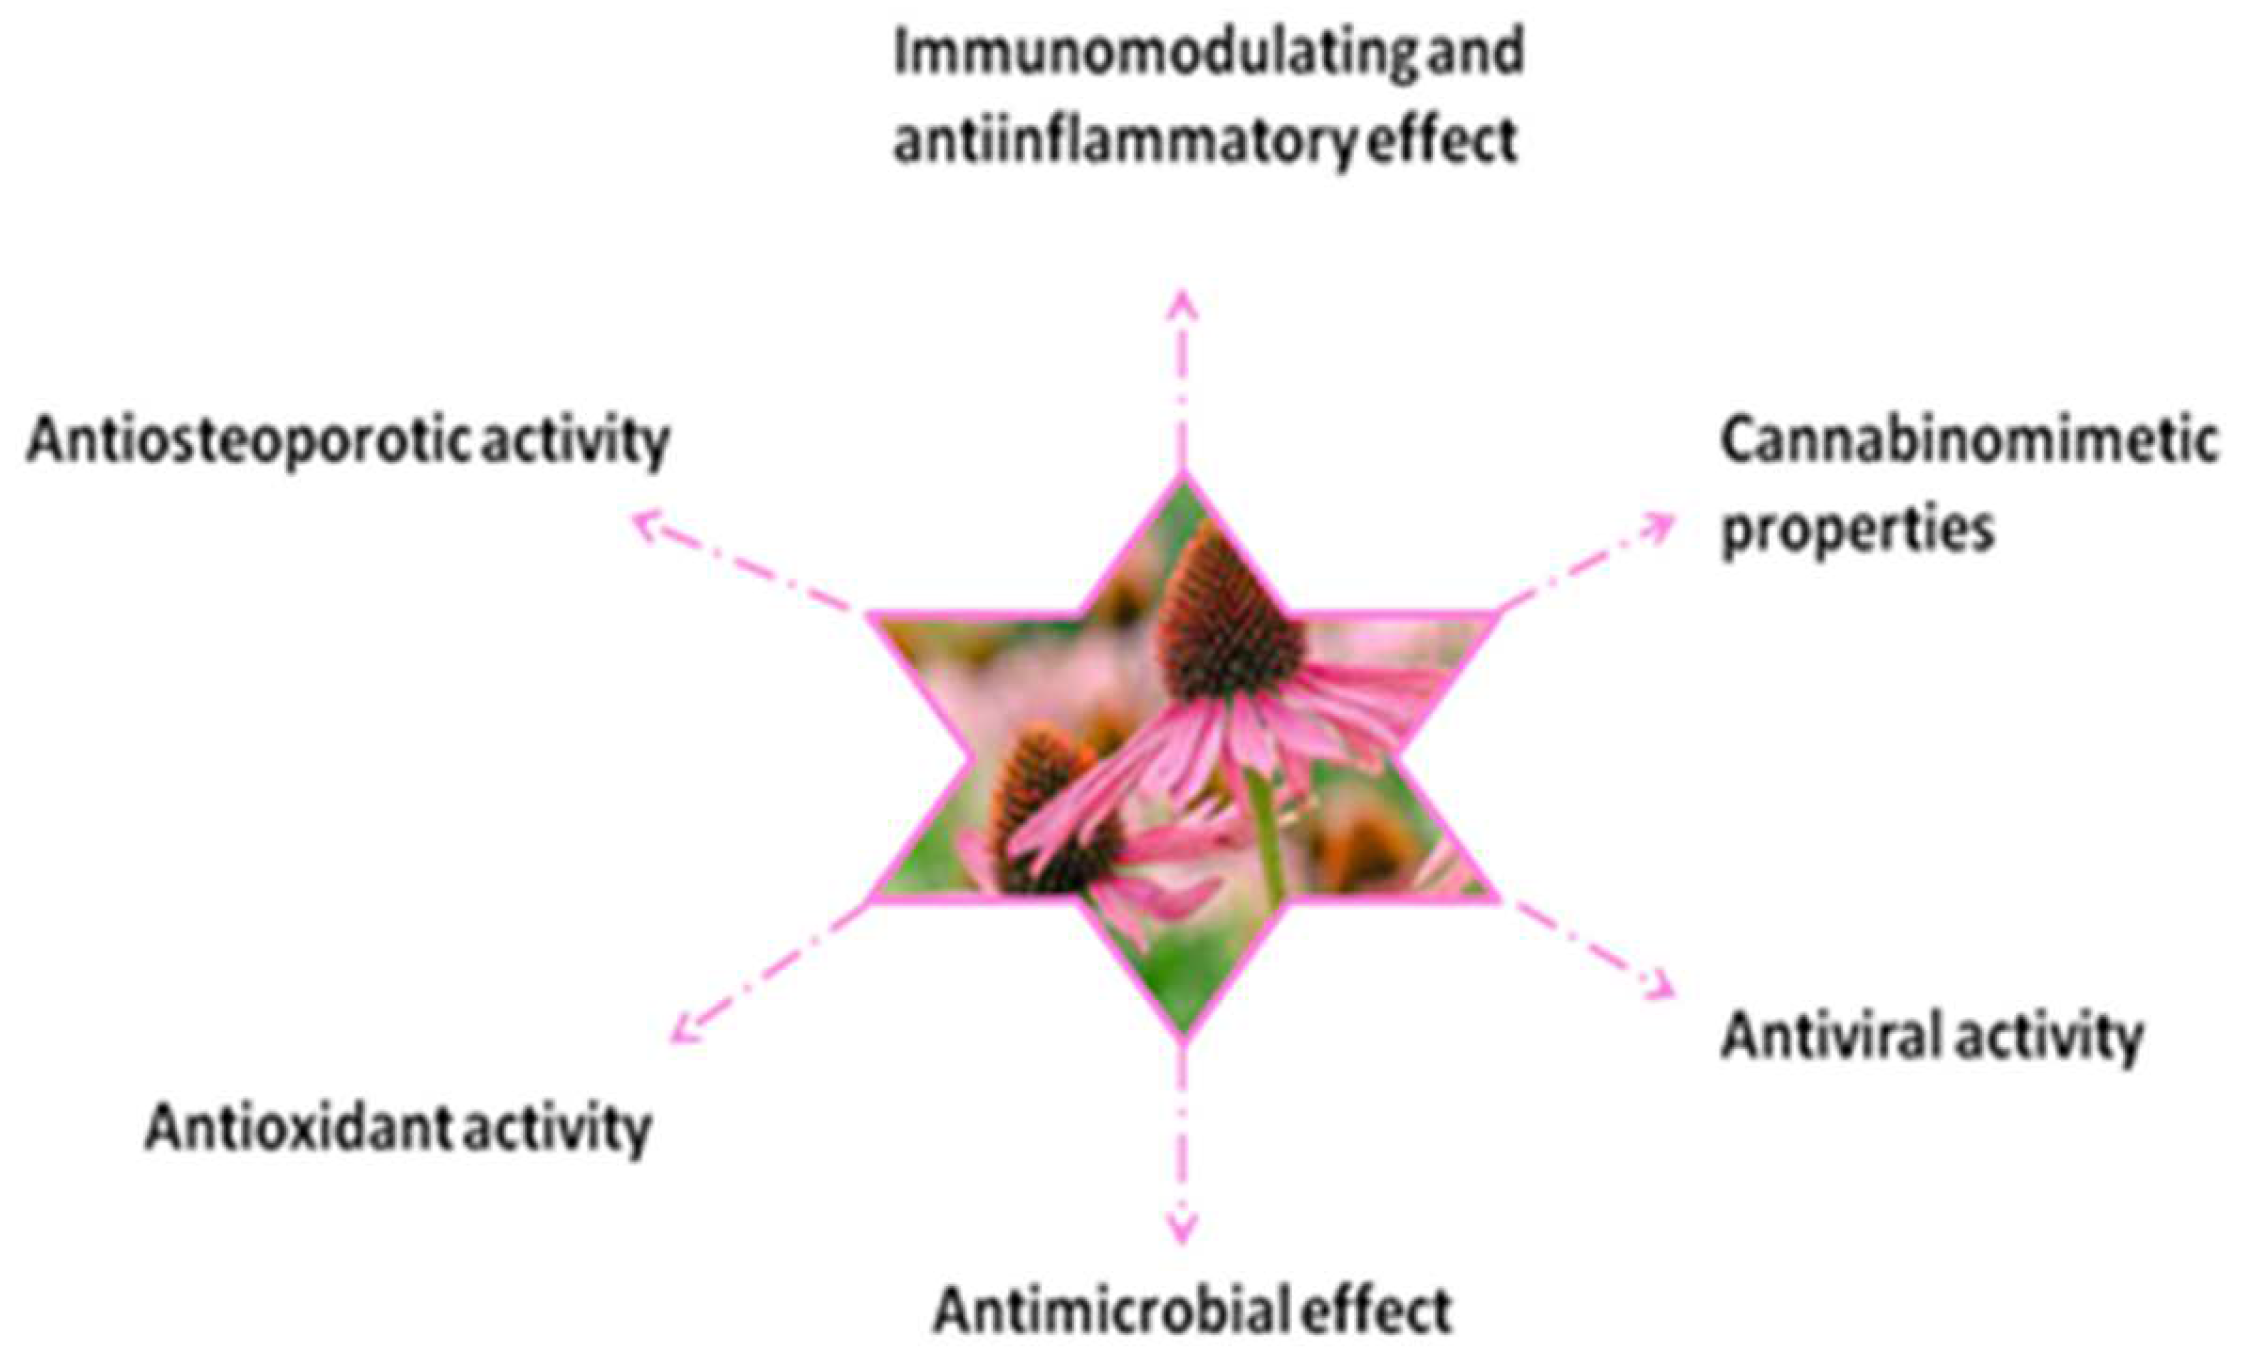 A summary of metabolite distribution in the three medicinal Echinacea